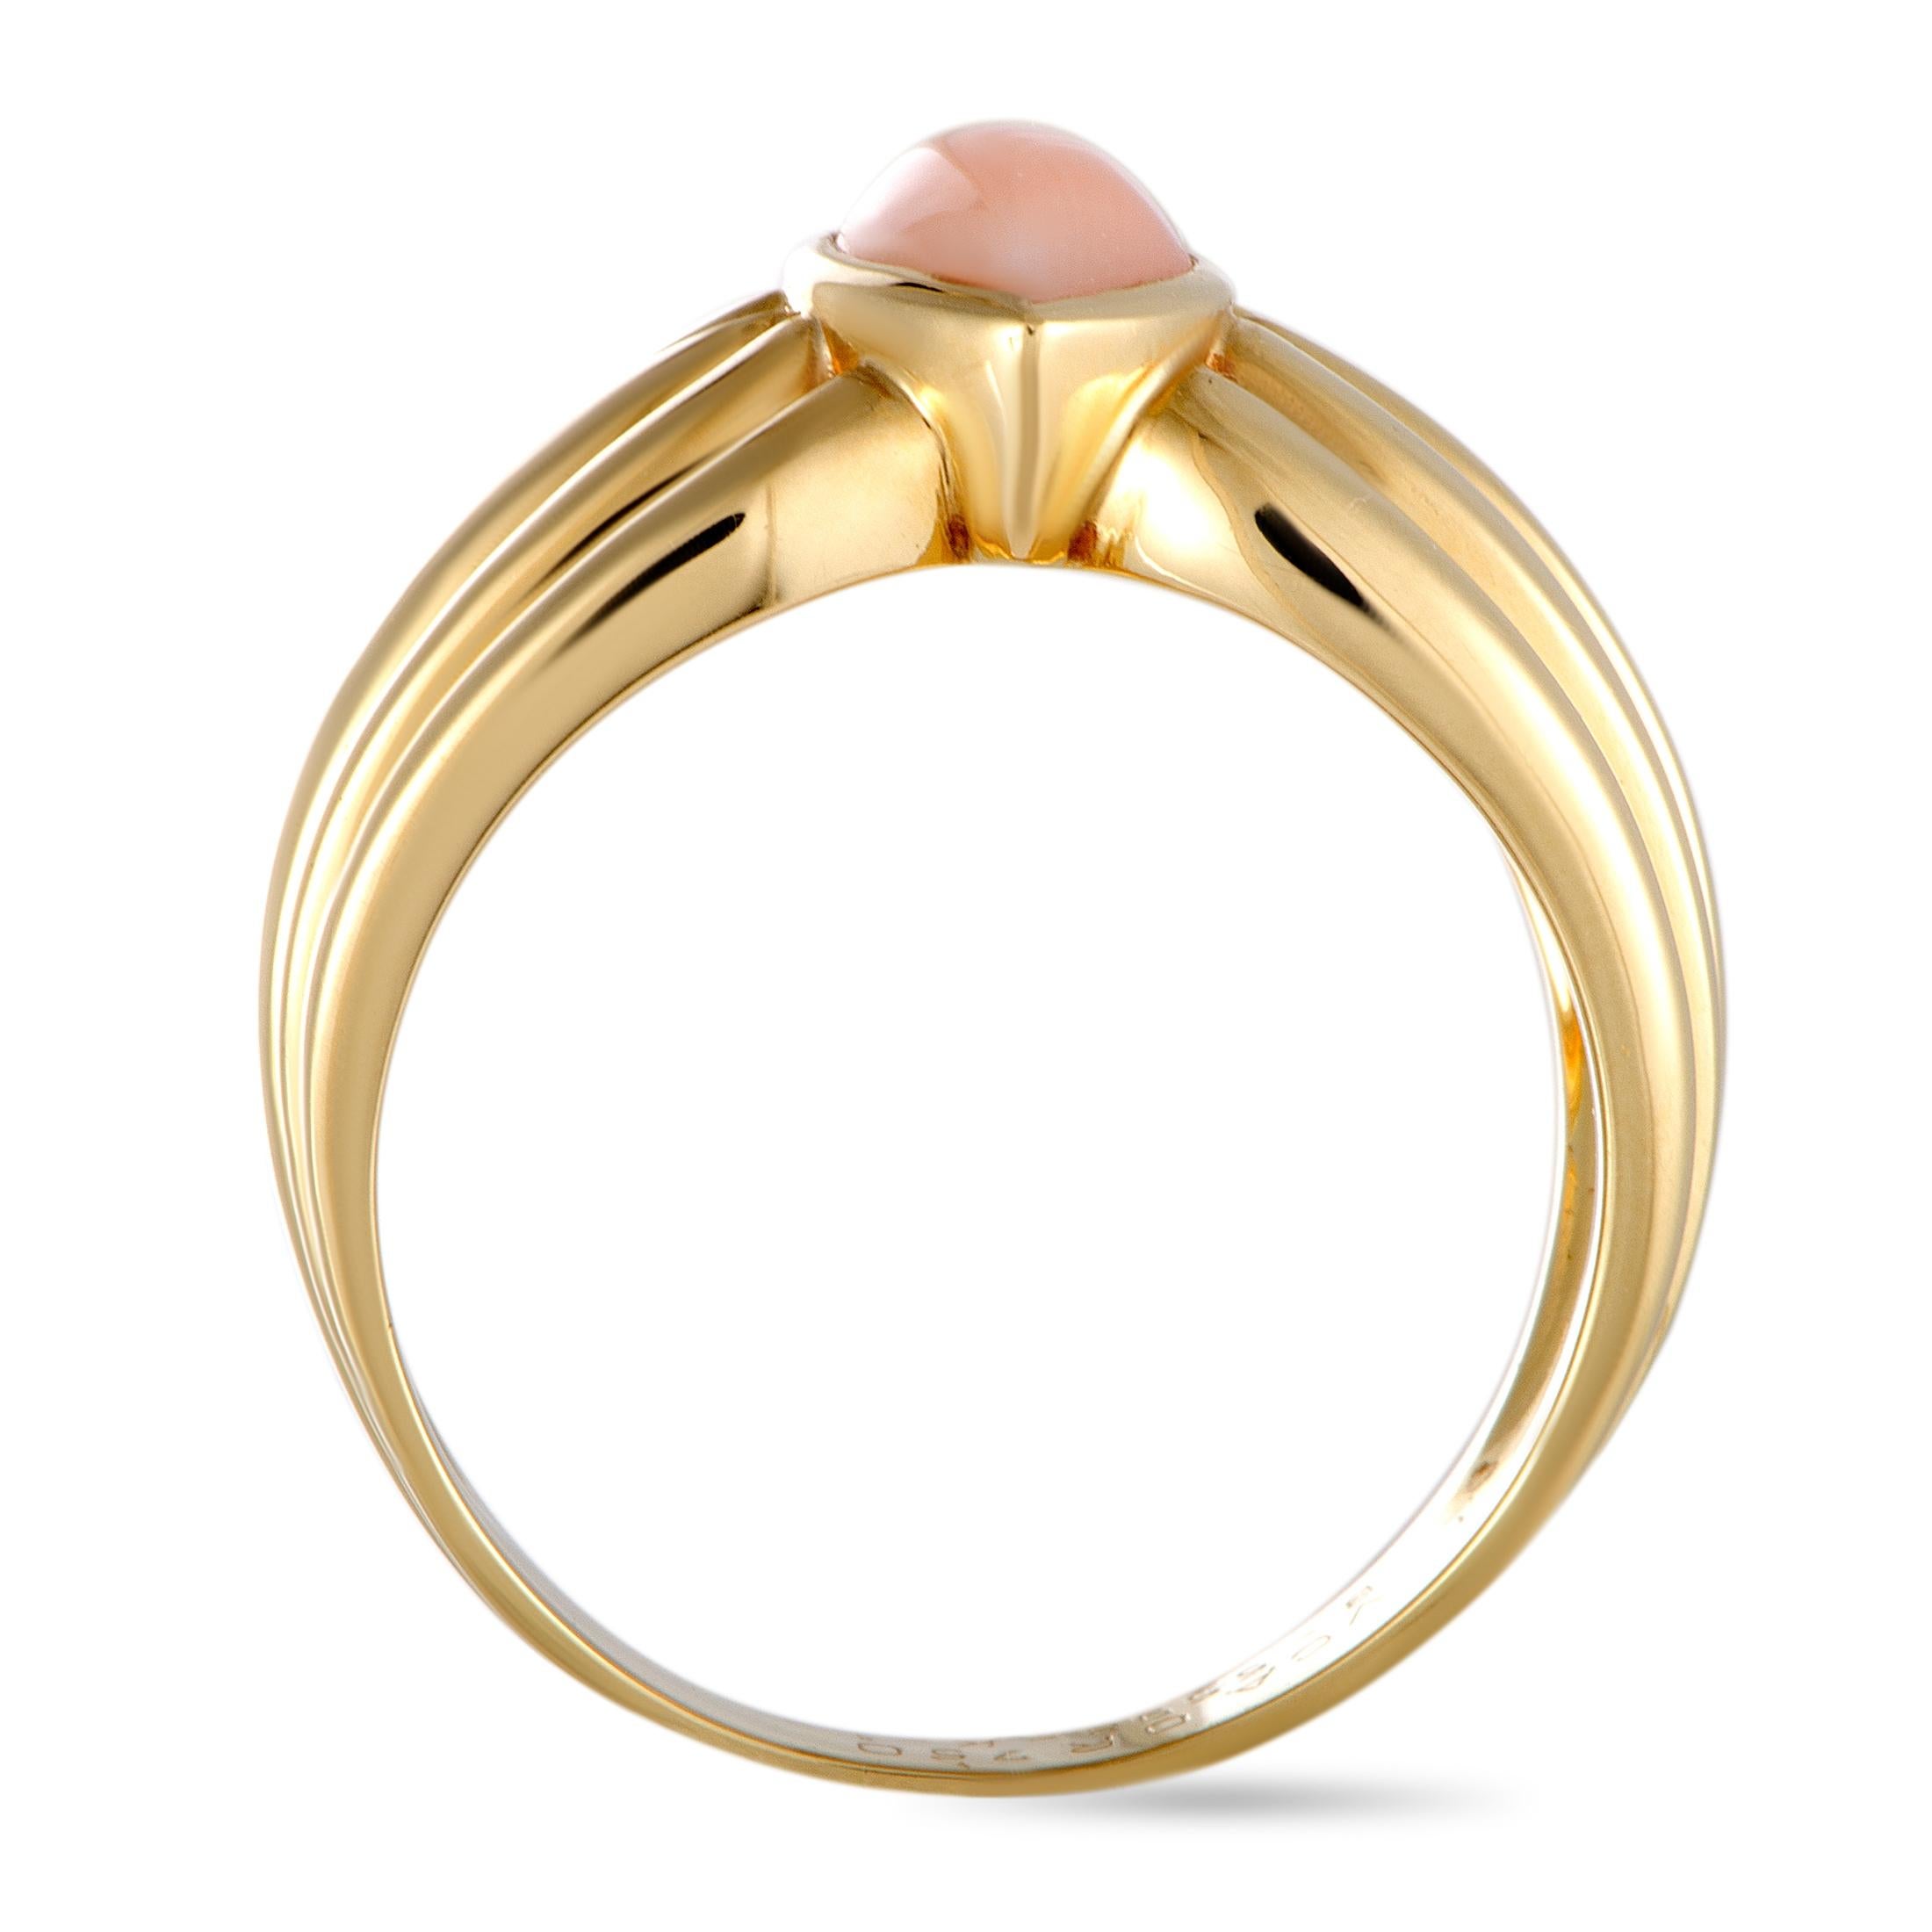 This vintage Van Cleef & Arpels ring is made out of 18K yellow gold and coral and weighs 7.2 grams. It boasts band thickness of 4 mm and top height of 5 mm, while top dimensions measure 11 by 4 mm.

Offered in estate condition, this item includes